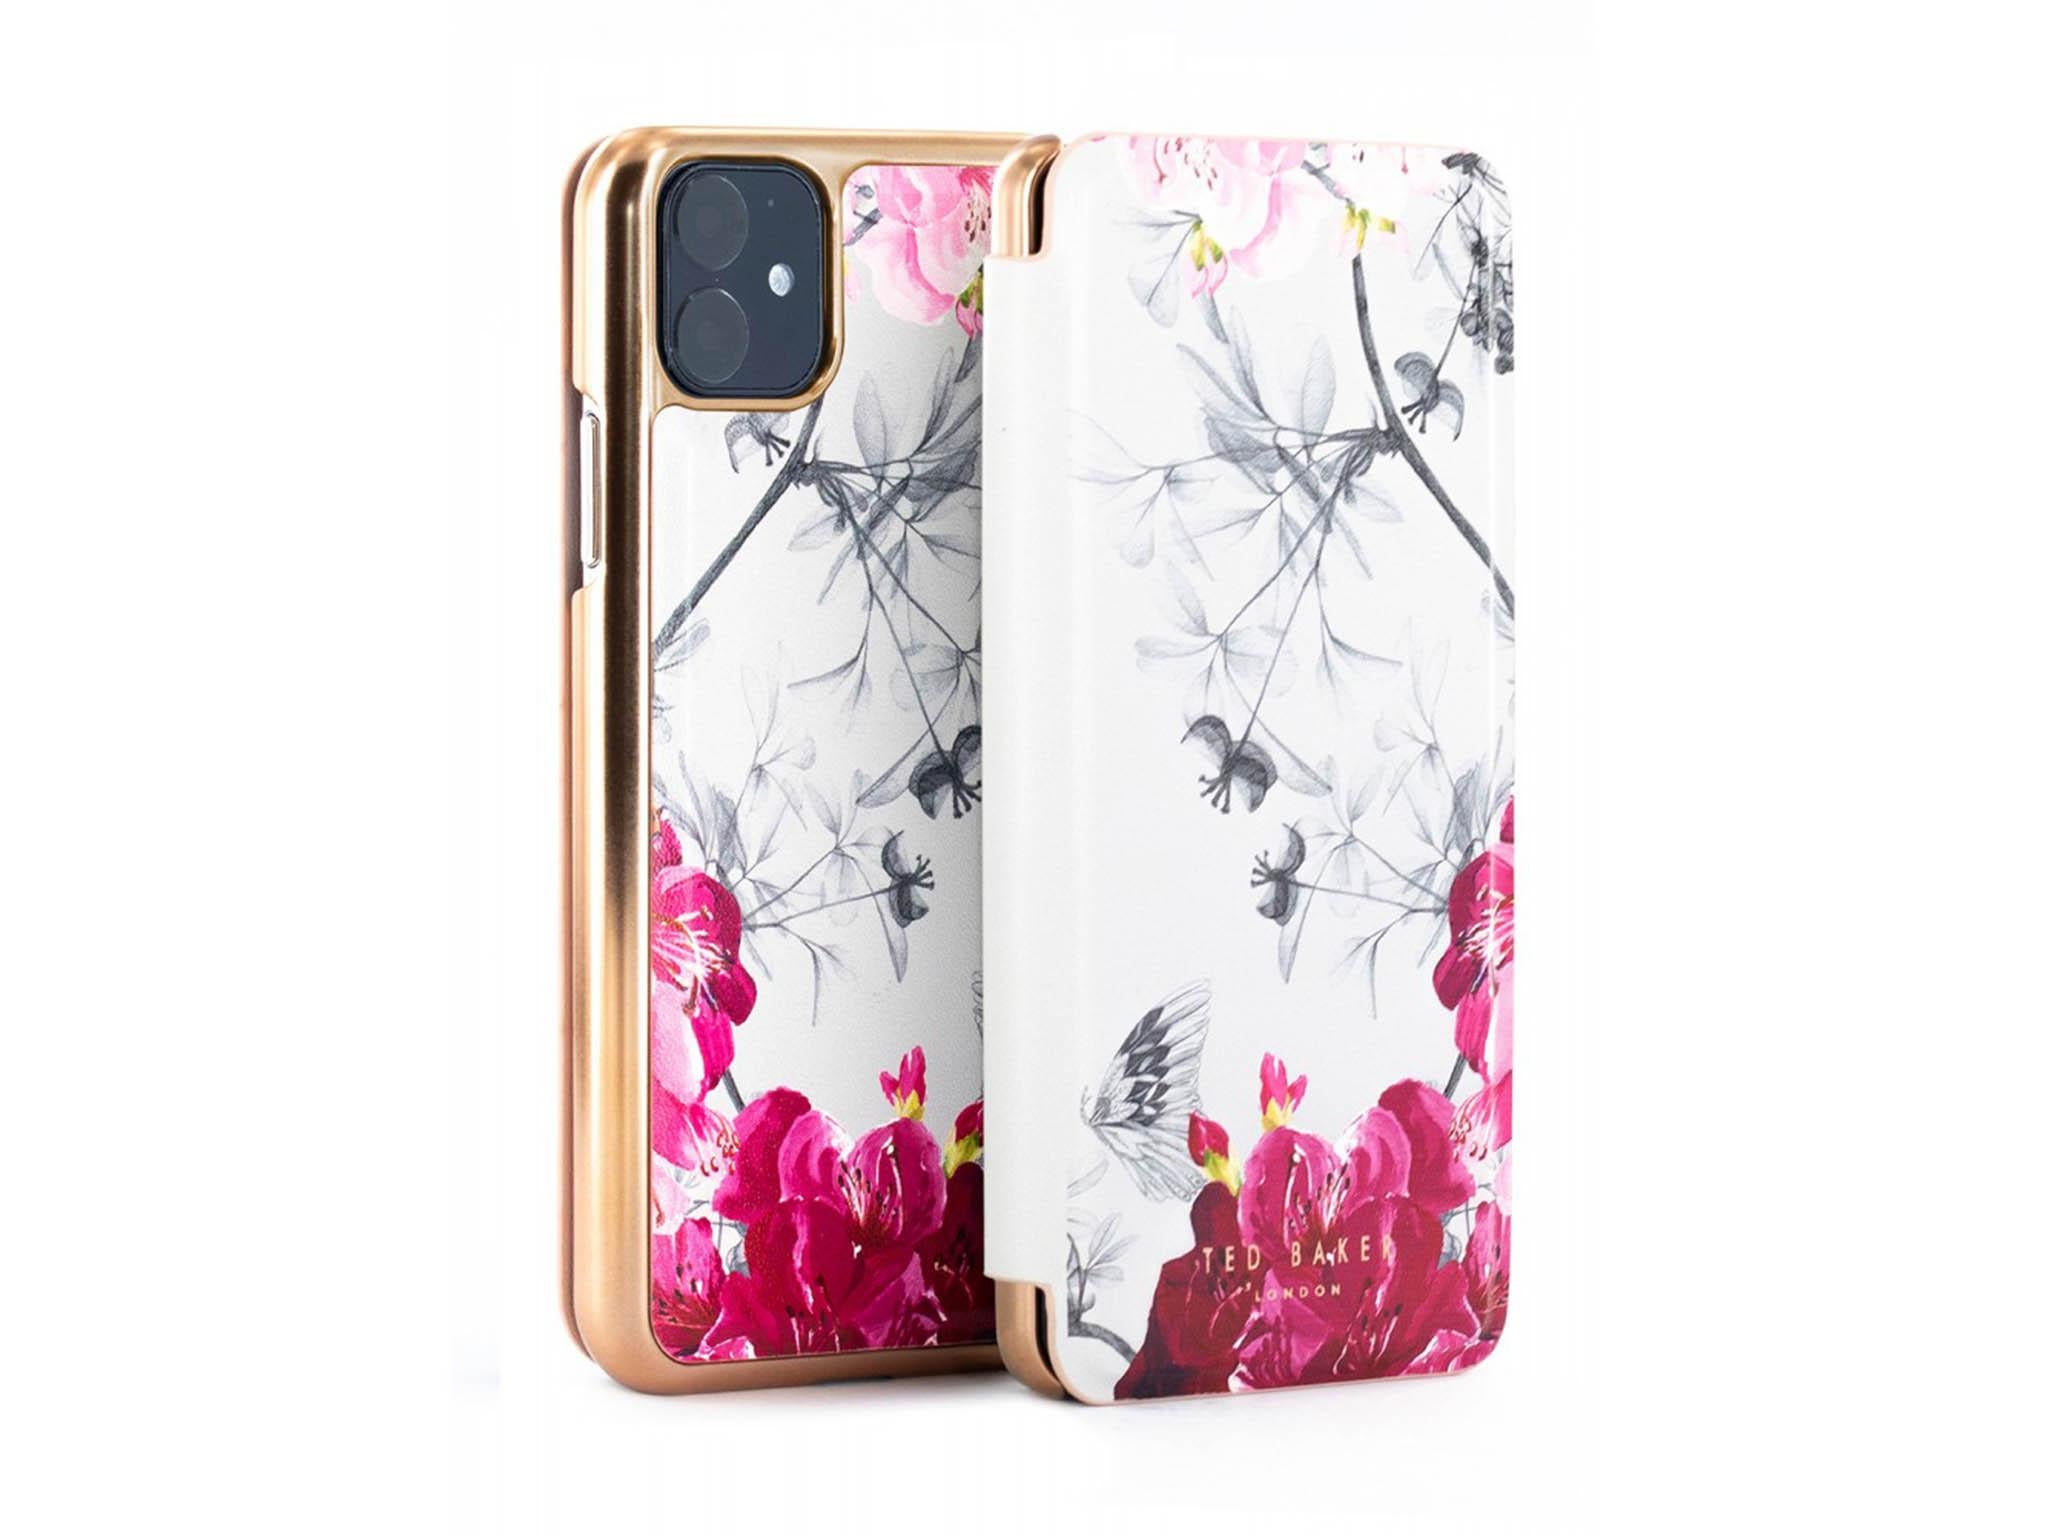 Best Iphone 11 And Iphone 11 Pro Cases That Offer Protection